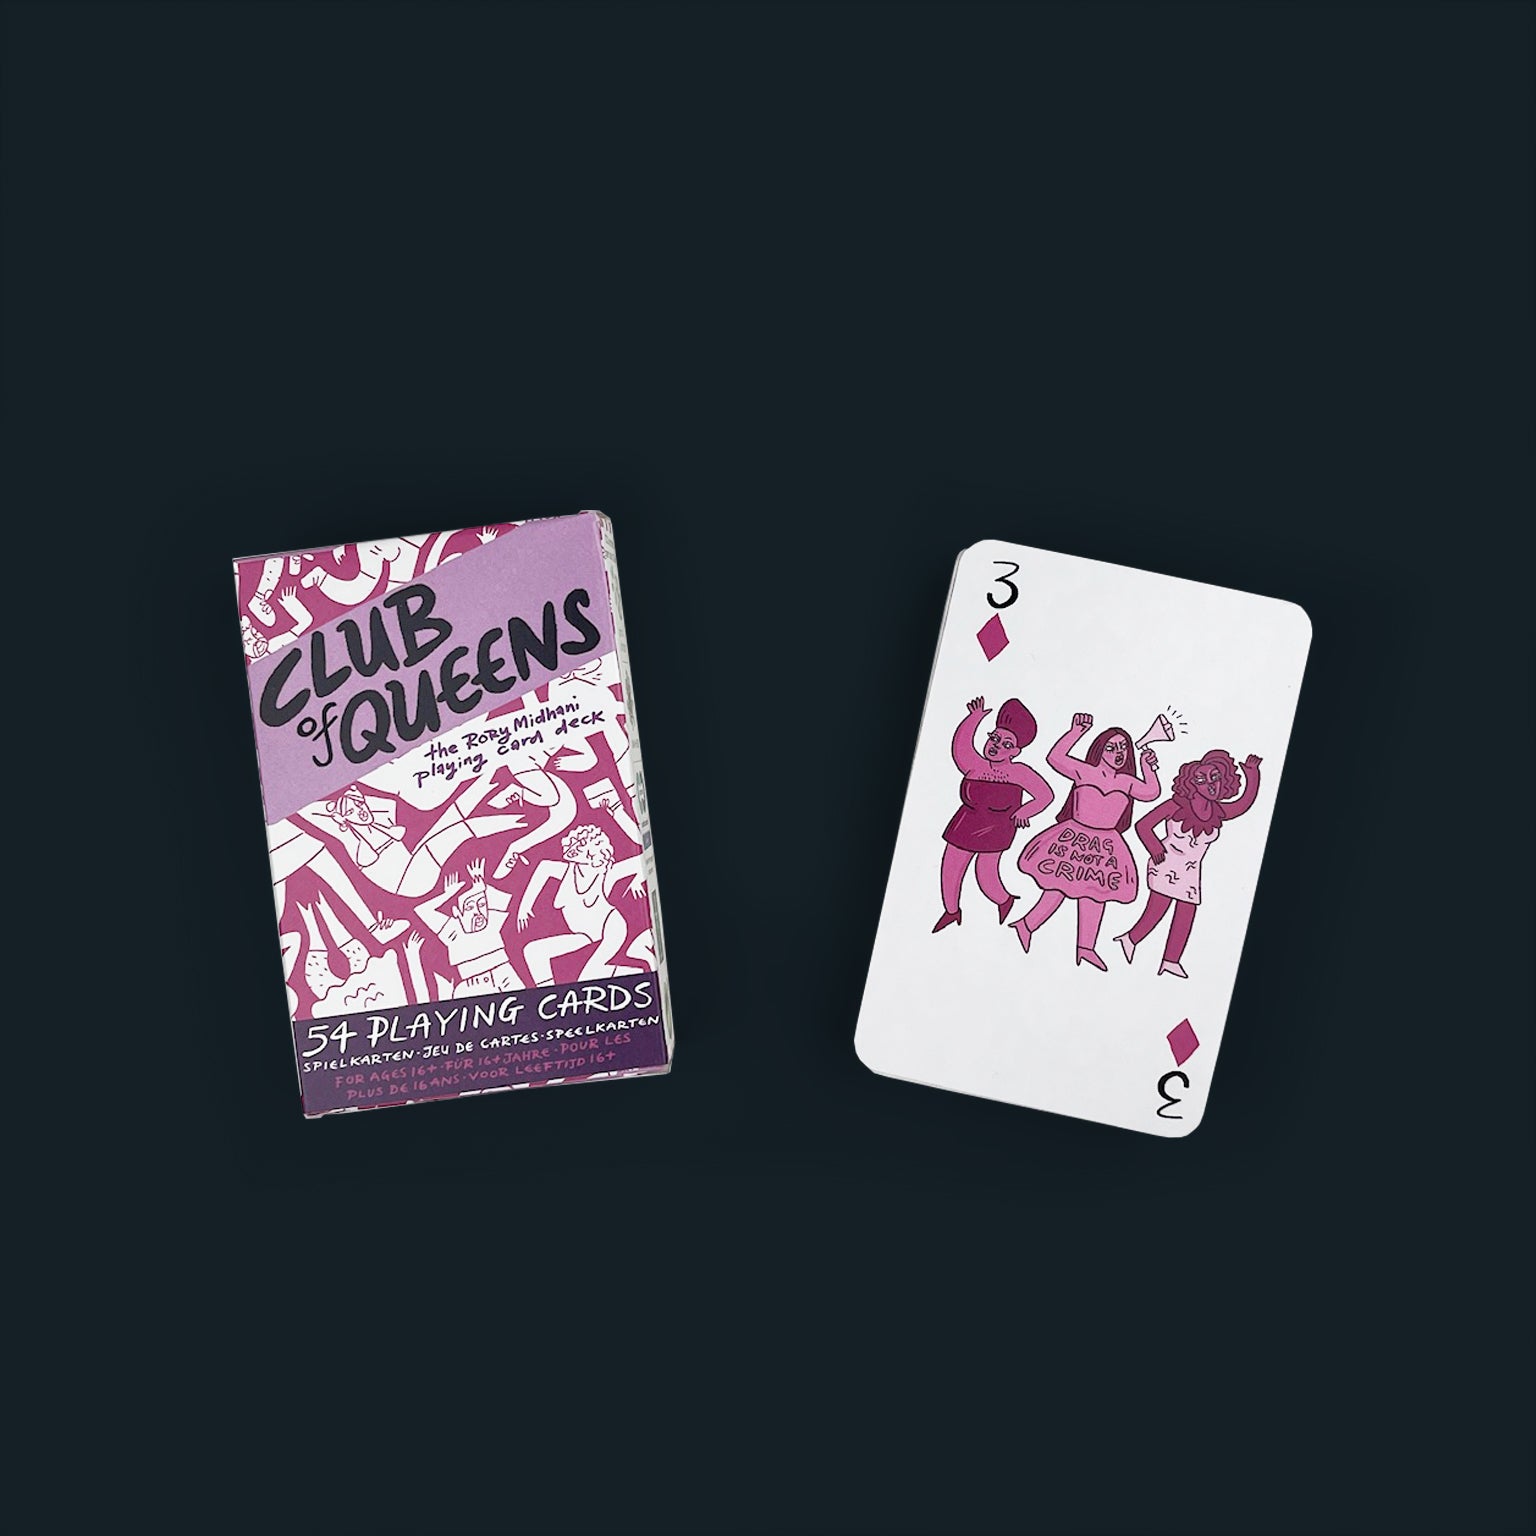 A pink and purple box of playing cards next to a stack of cards with the three of diamonds on top. On the card are three drag queens, the middle wearing a dress that says "Drag is not a crime".